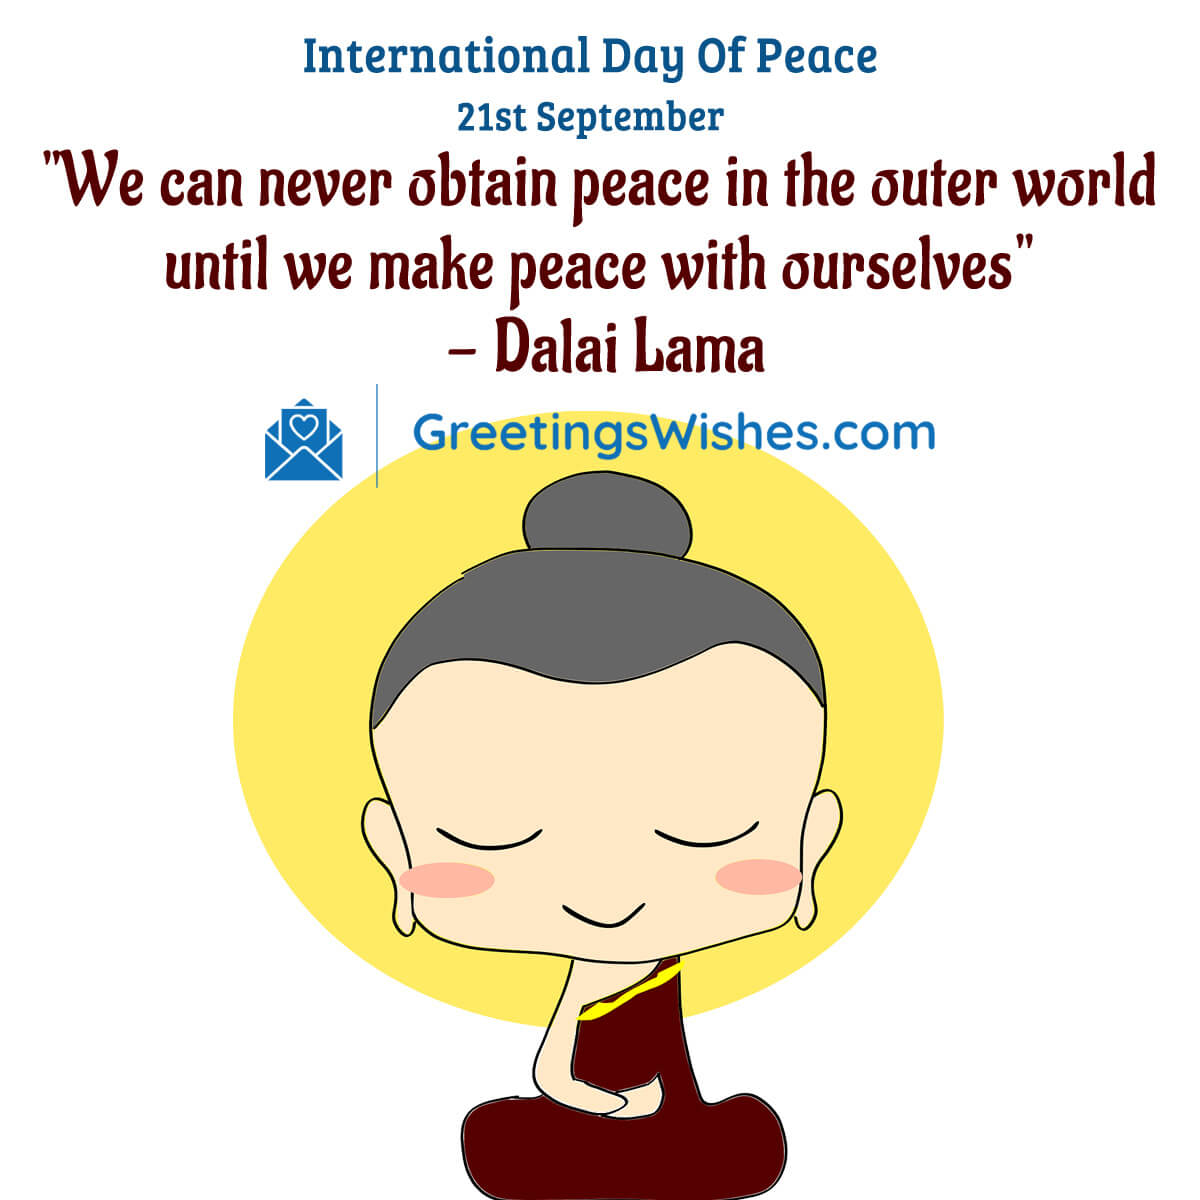 International Peace Day Quotes